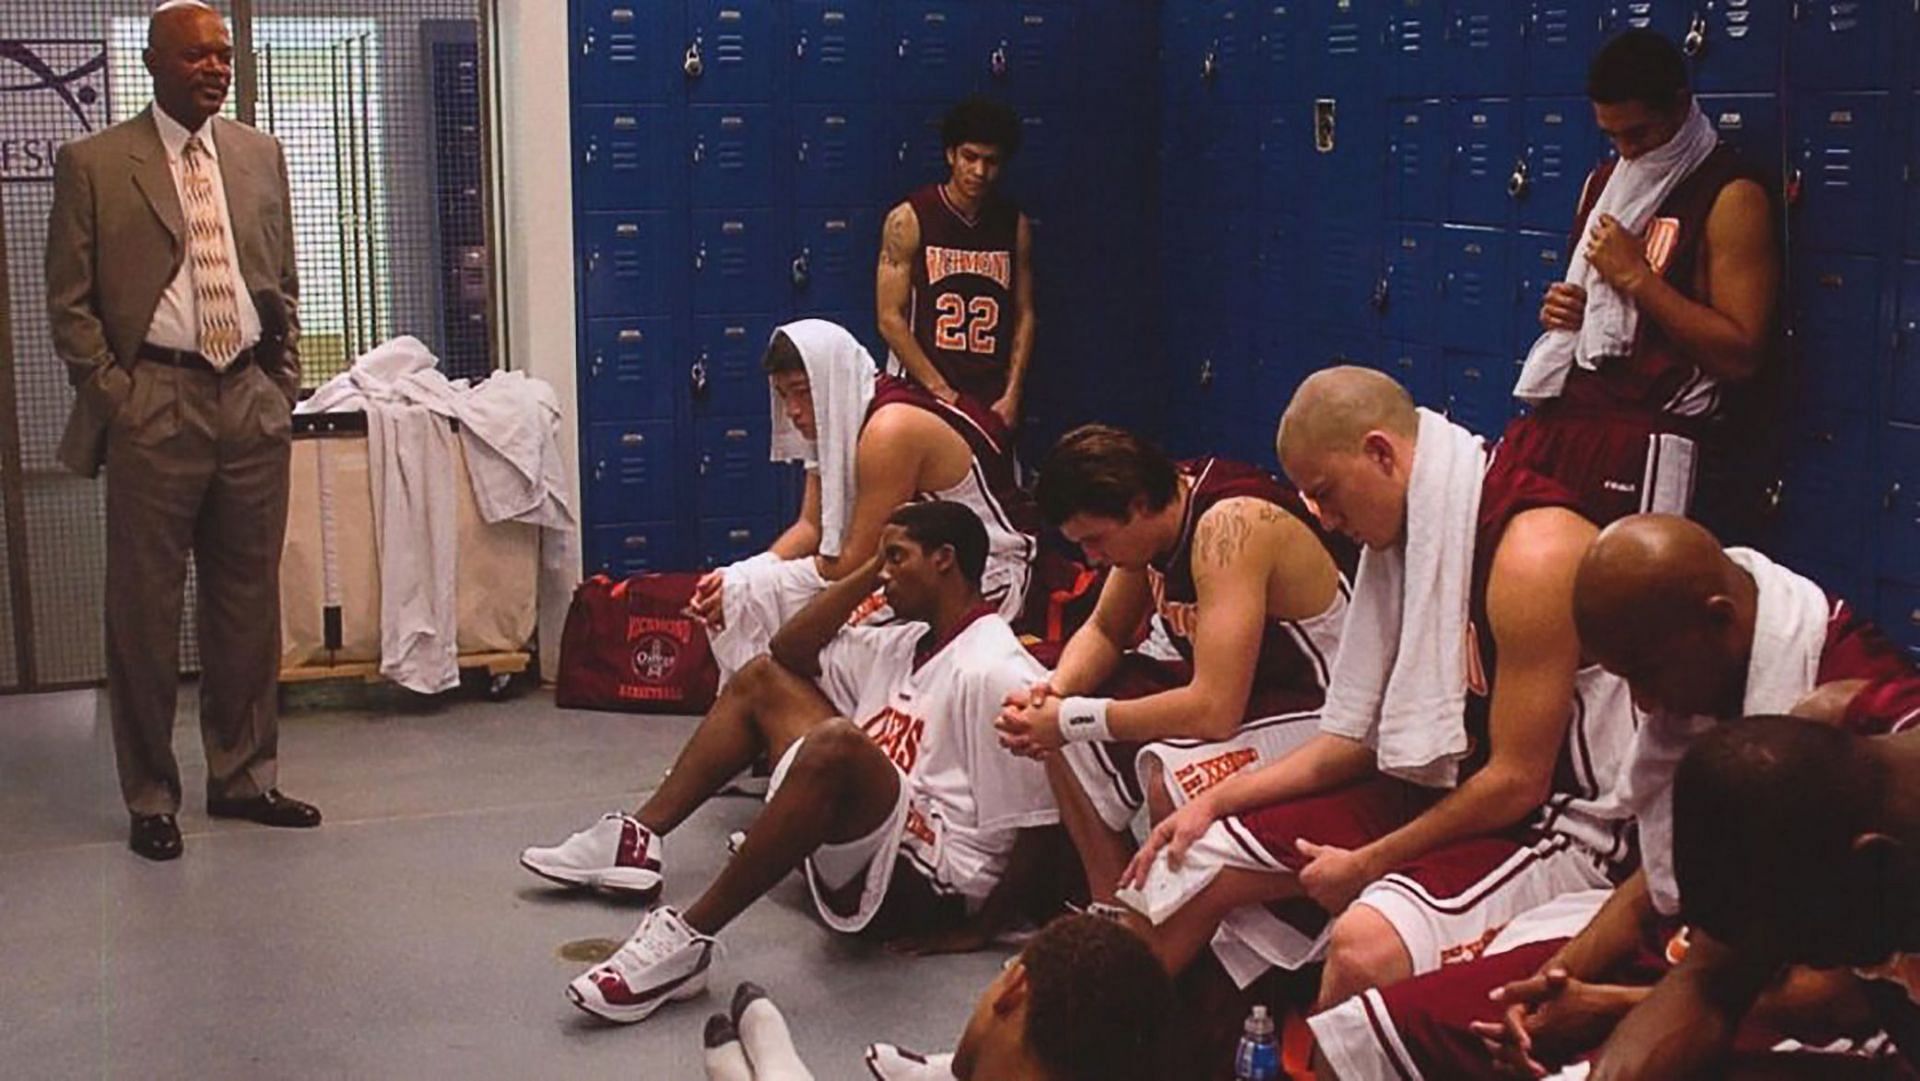 Coach Carter talks with his team in the locker room (Image via Paramount)